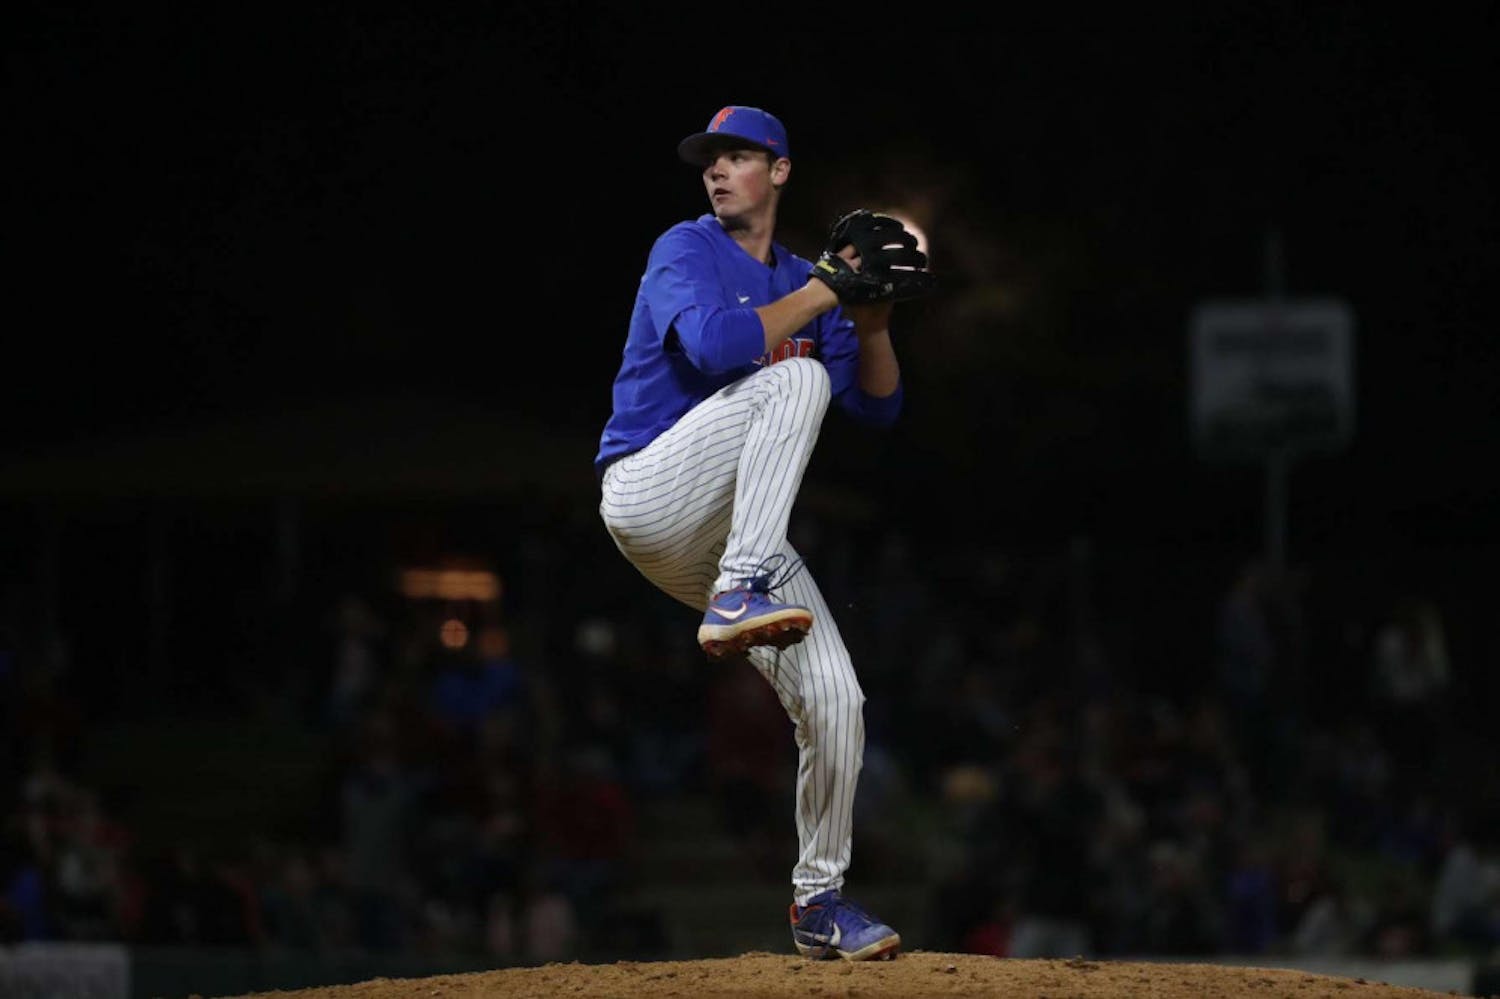 Hunter Barco, a 19-year-old UF business administration freshman, pitches in an exhibition game against Georgia. Barco allowed four runs in a 5-2 loss to the Hurricanes.